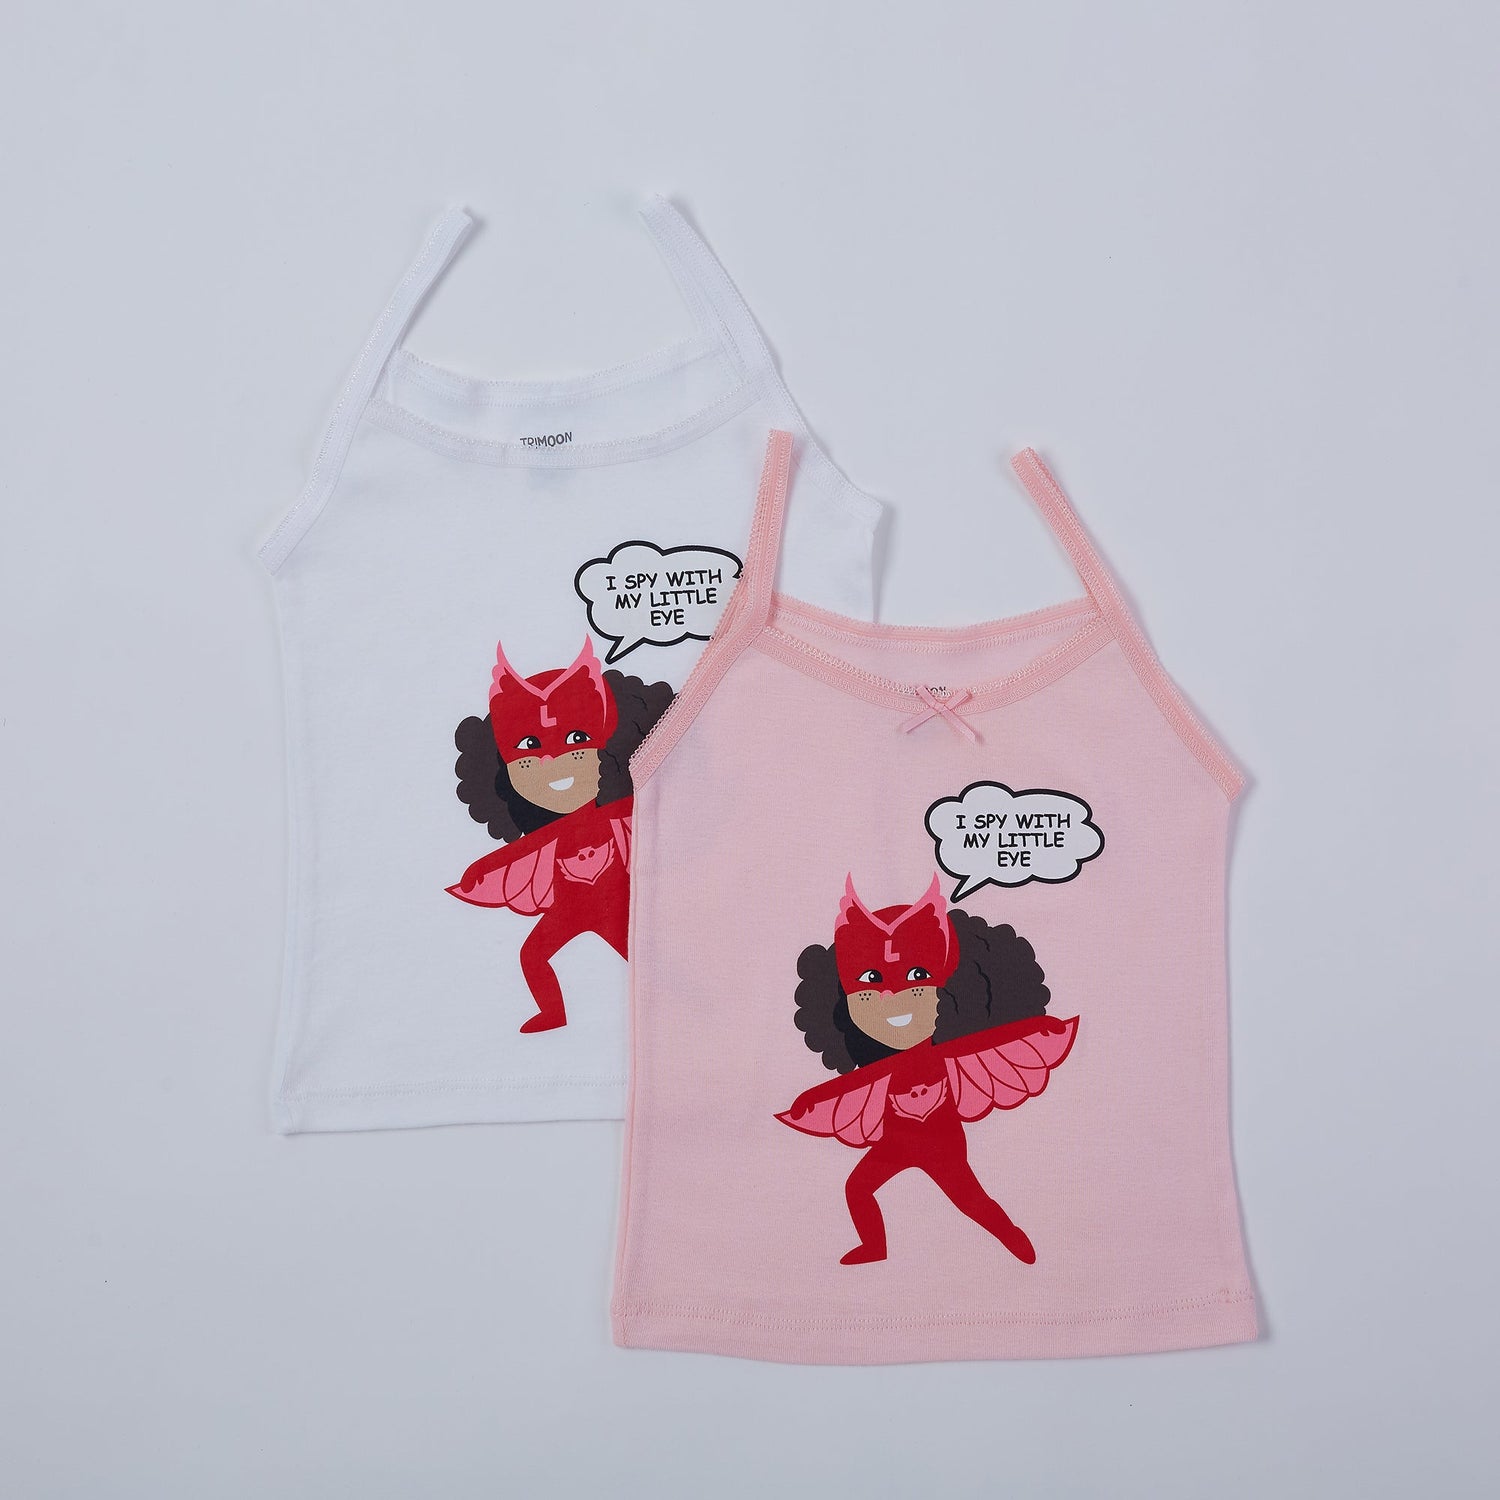 Trimoon Pack of 2 Brand New Undershirts For Girls - Super Lila - mymadstore.com